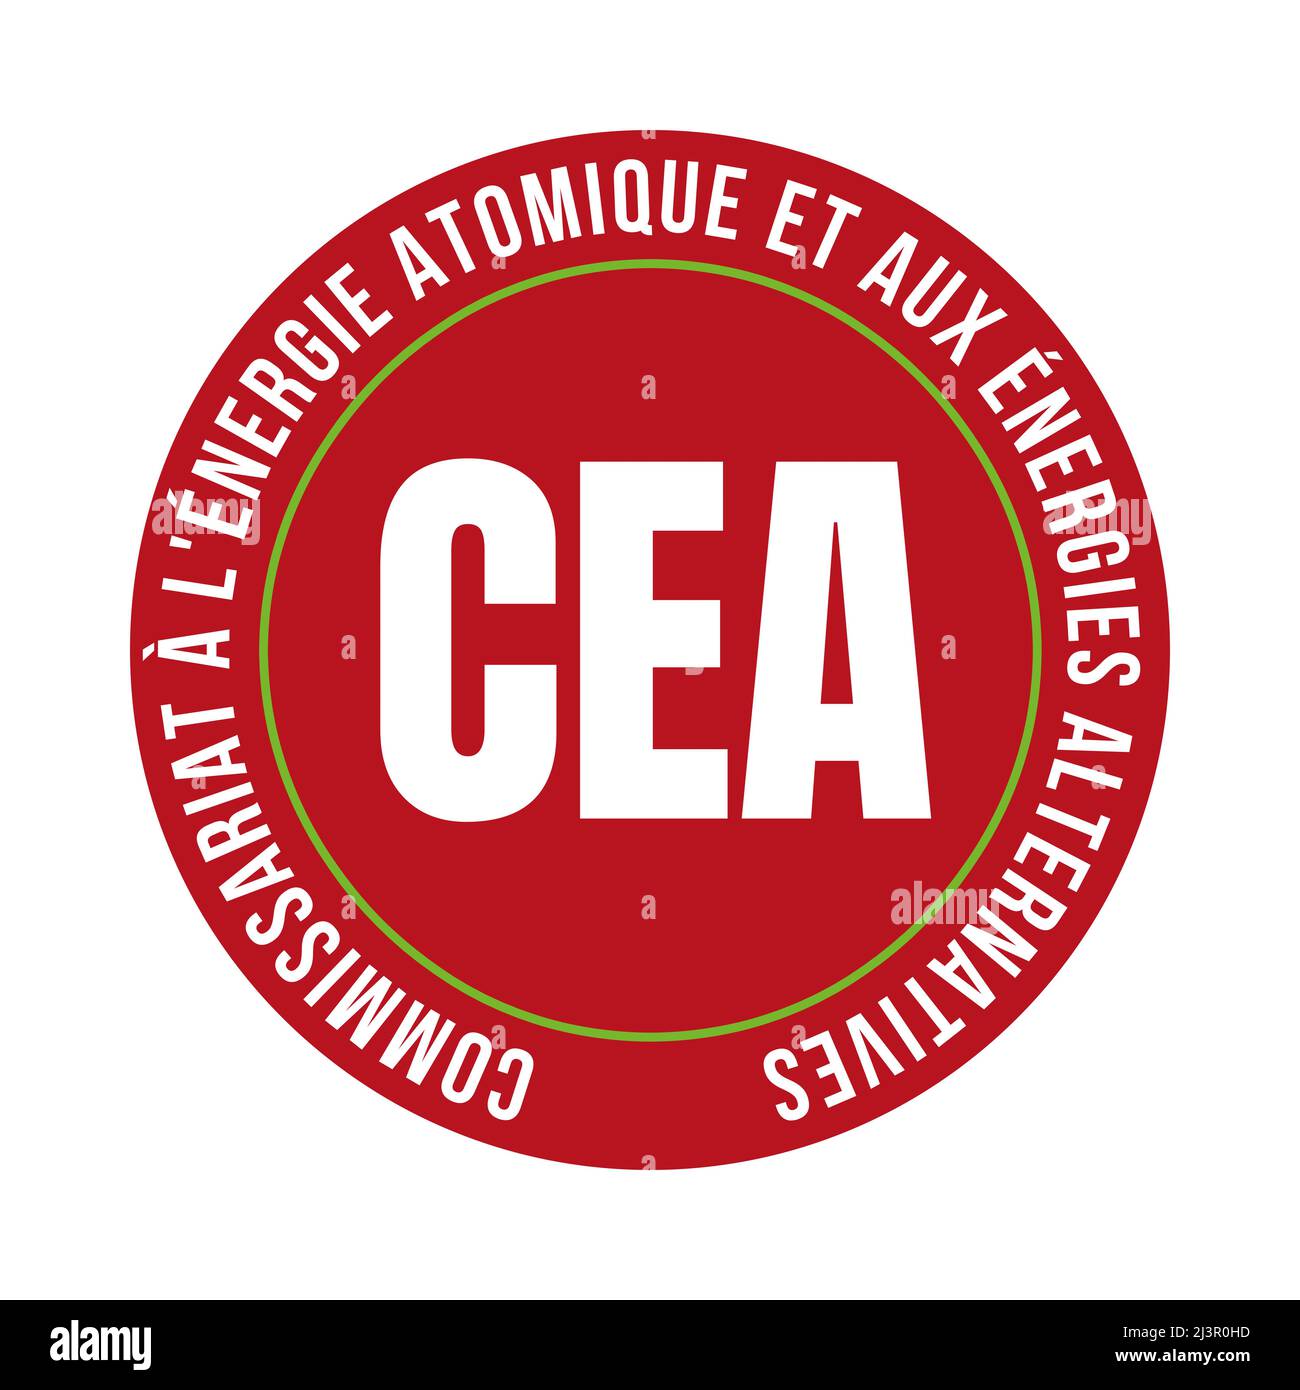 CEA french aternative energies and atomic energy commission symbol icon called  commissariat a l'energie atomique et aux energies alternatives Stock Photo